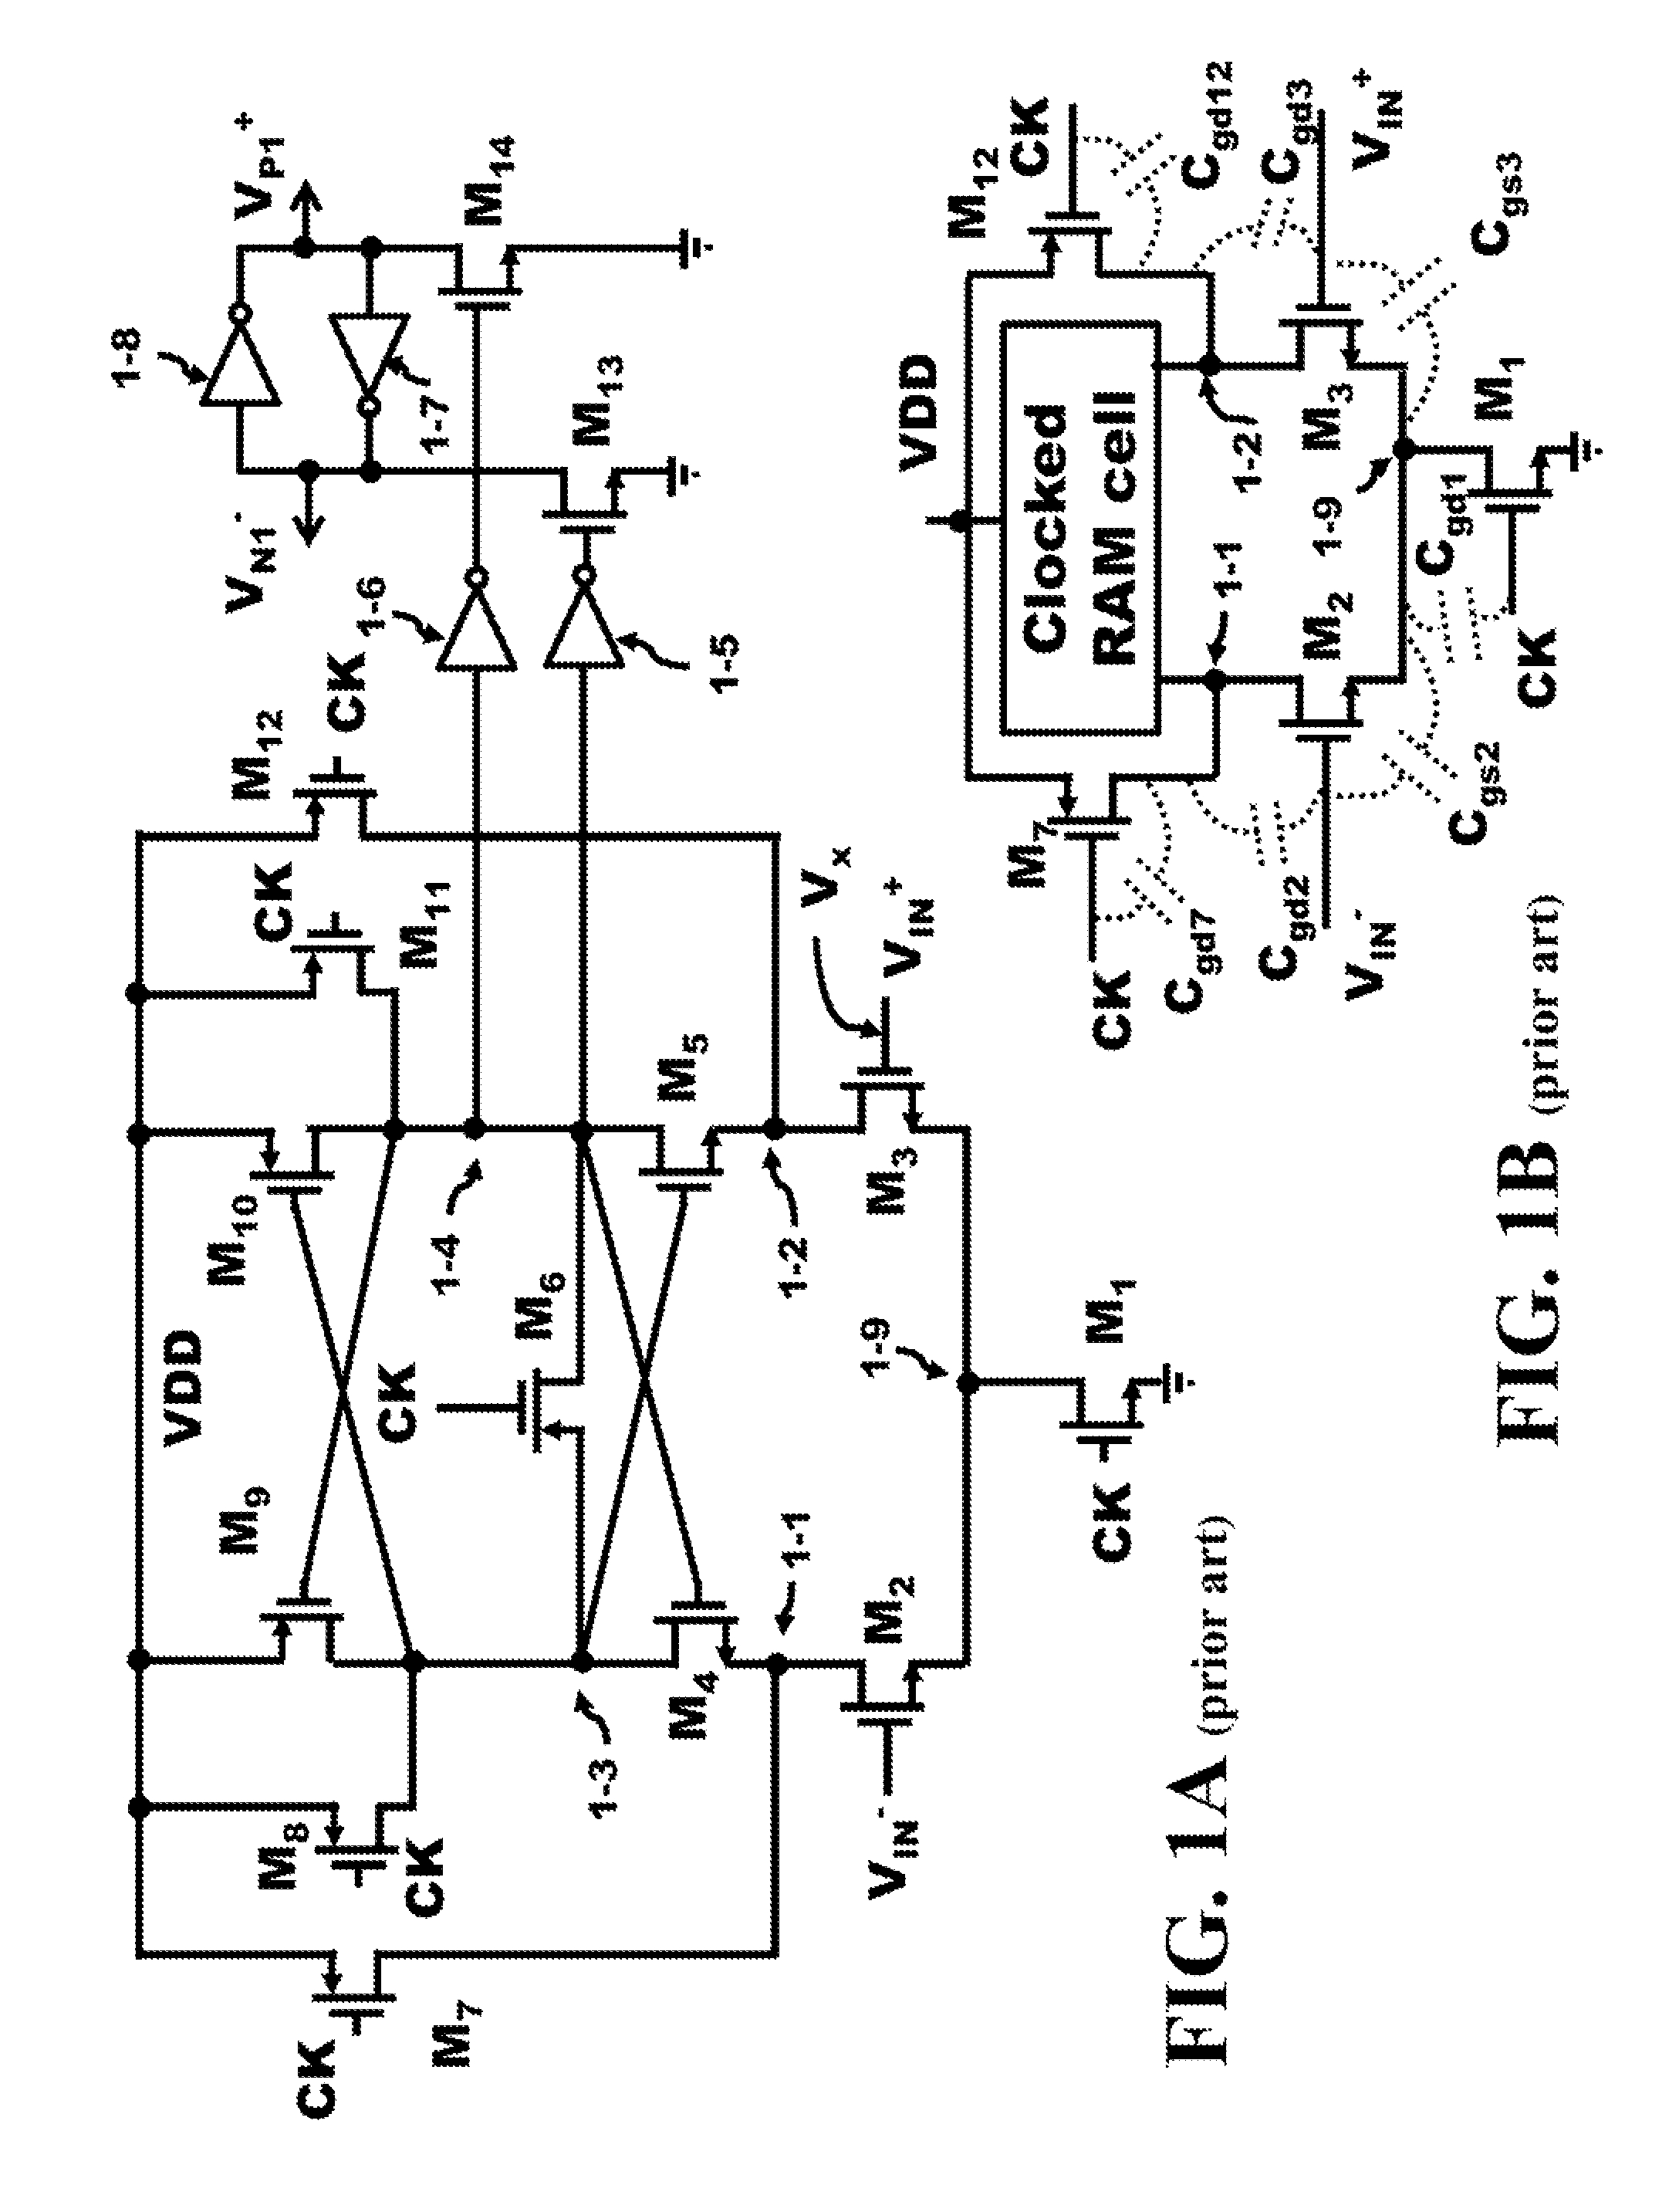 Method and apparatus for an active negative-capacitor circuit to cancel the input capacitance of comparators